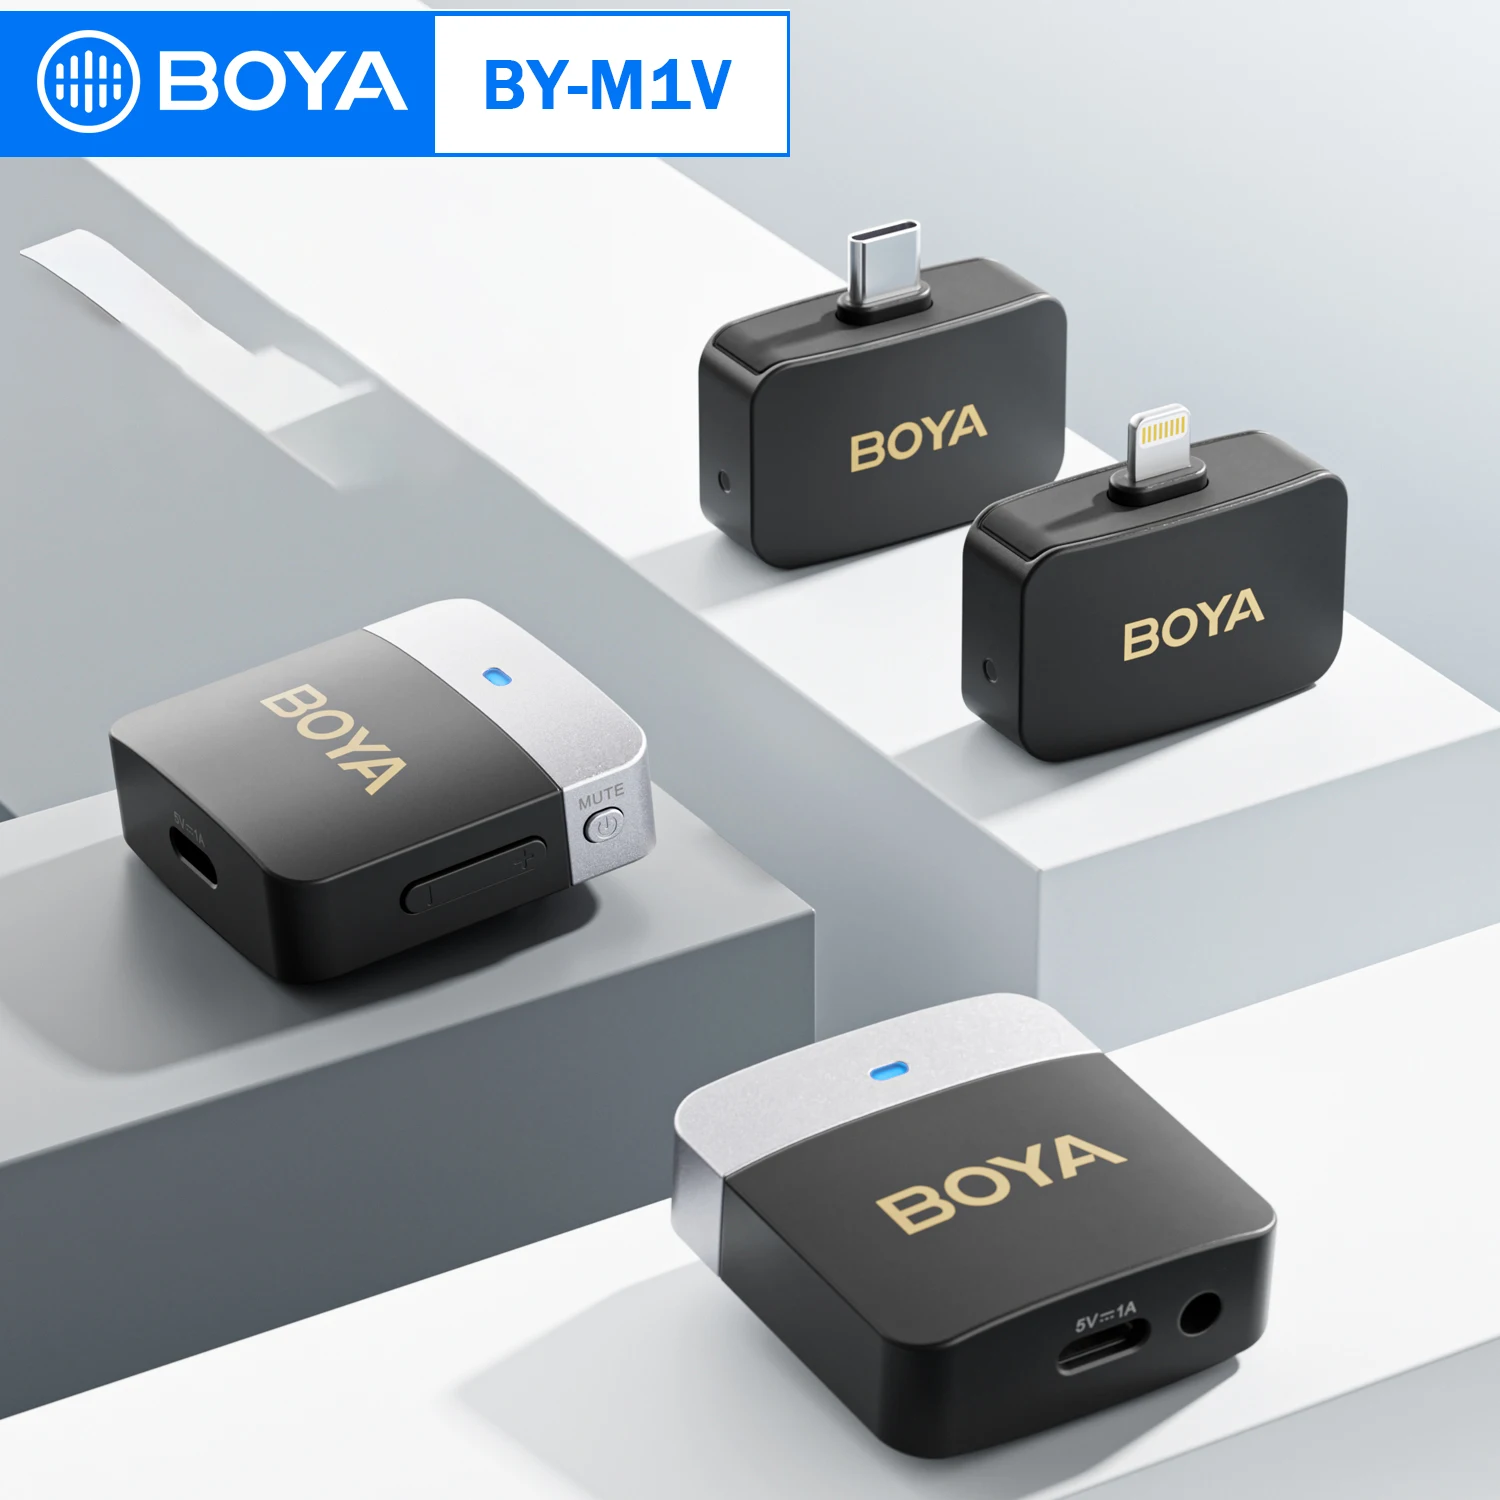 

BOYA BY-M1V 2.4G Wireless Lavalier Microphone System for iPhone Android Smartphone Camera Vlogging Streaming YouTube Broadcast